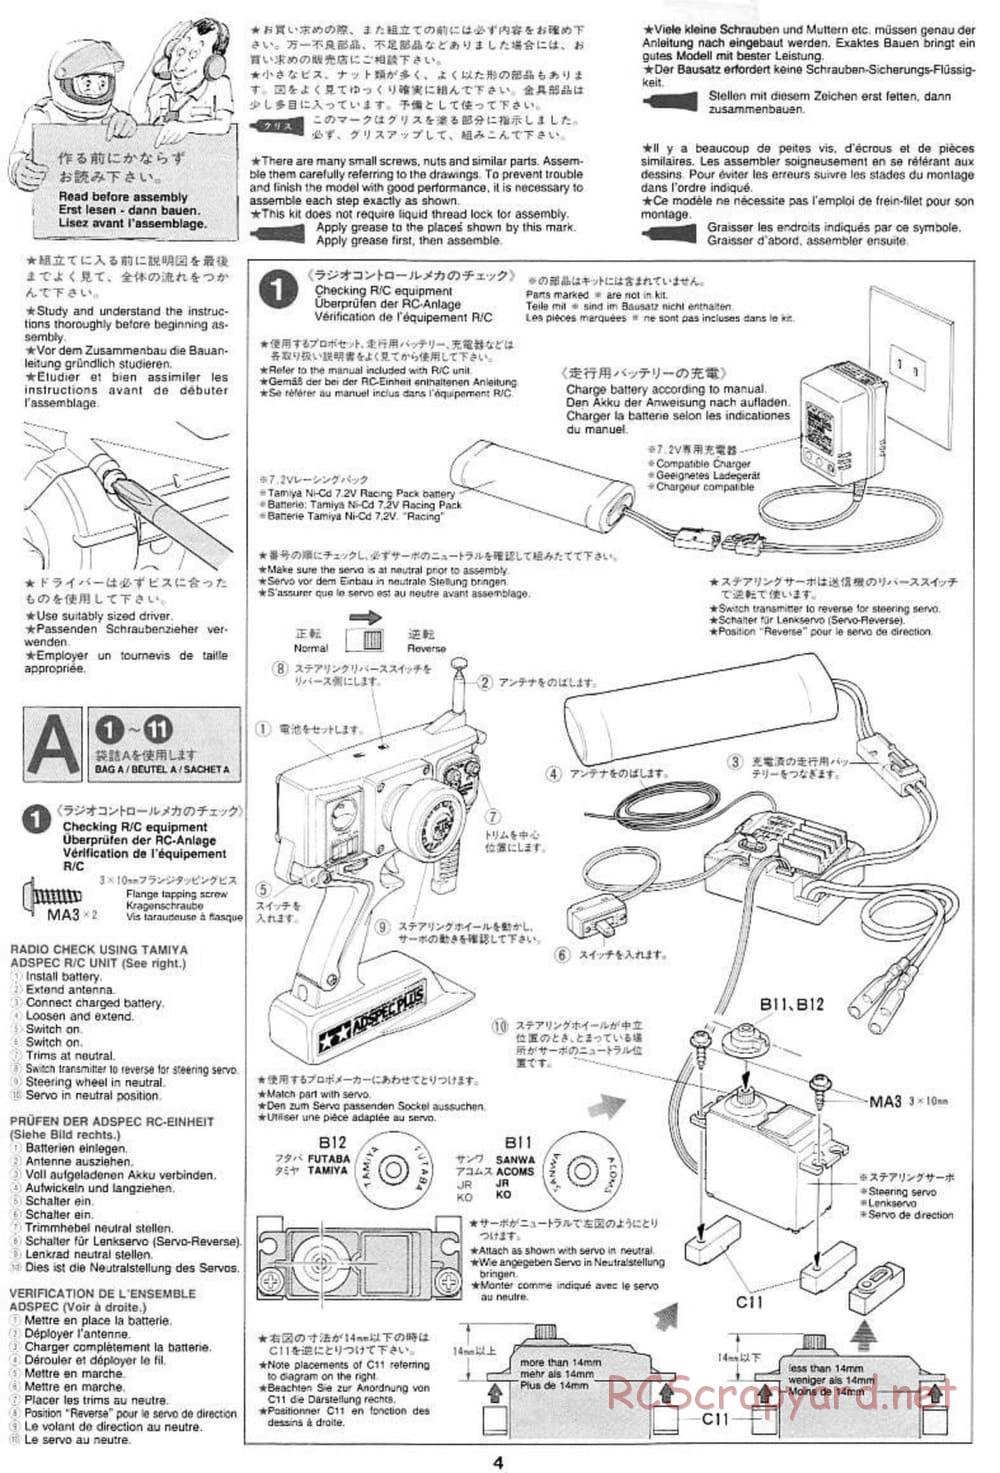 Tamiya - Pennzoil Nismo GT-R - TL-01 Chassis - Manual - Page 4